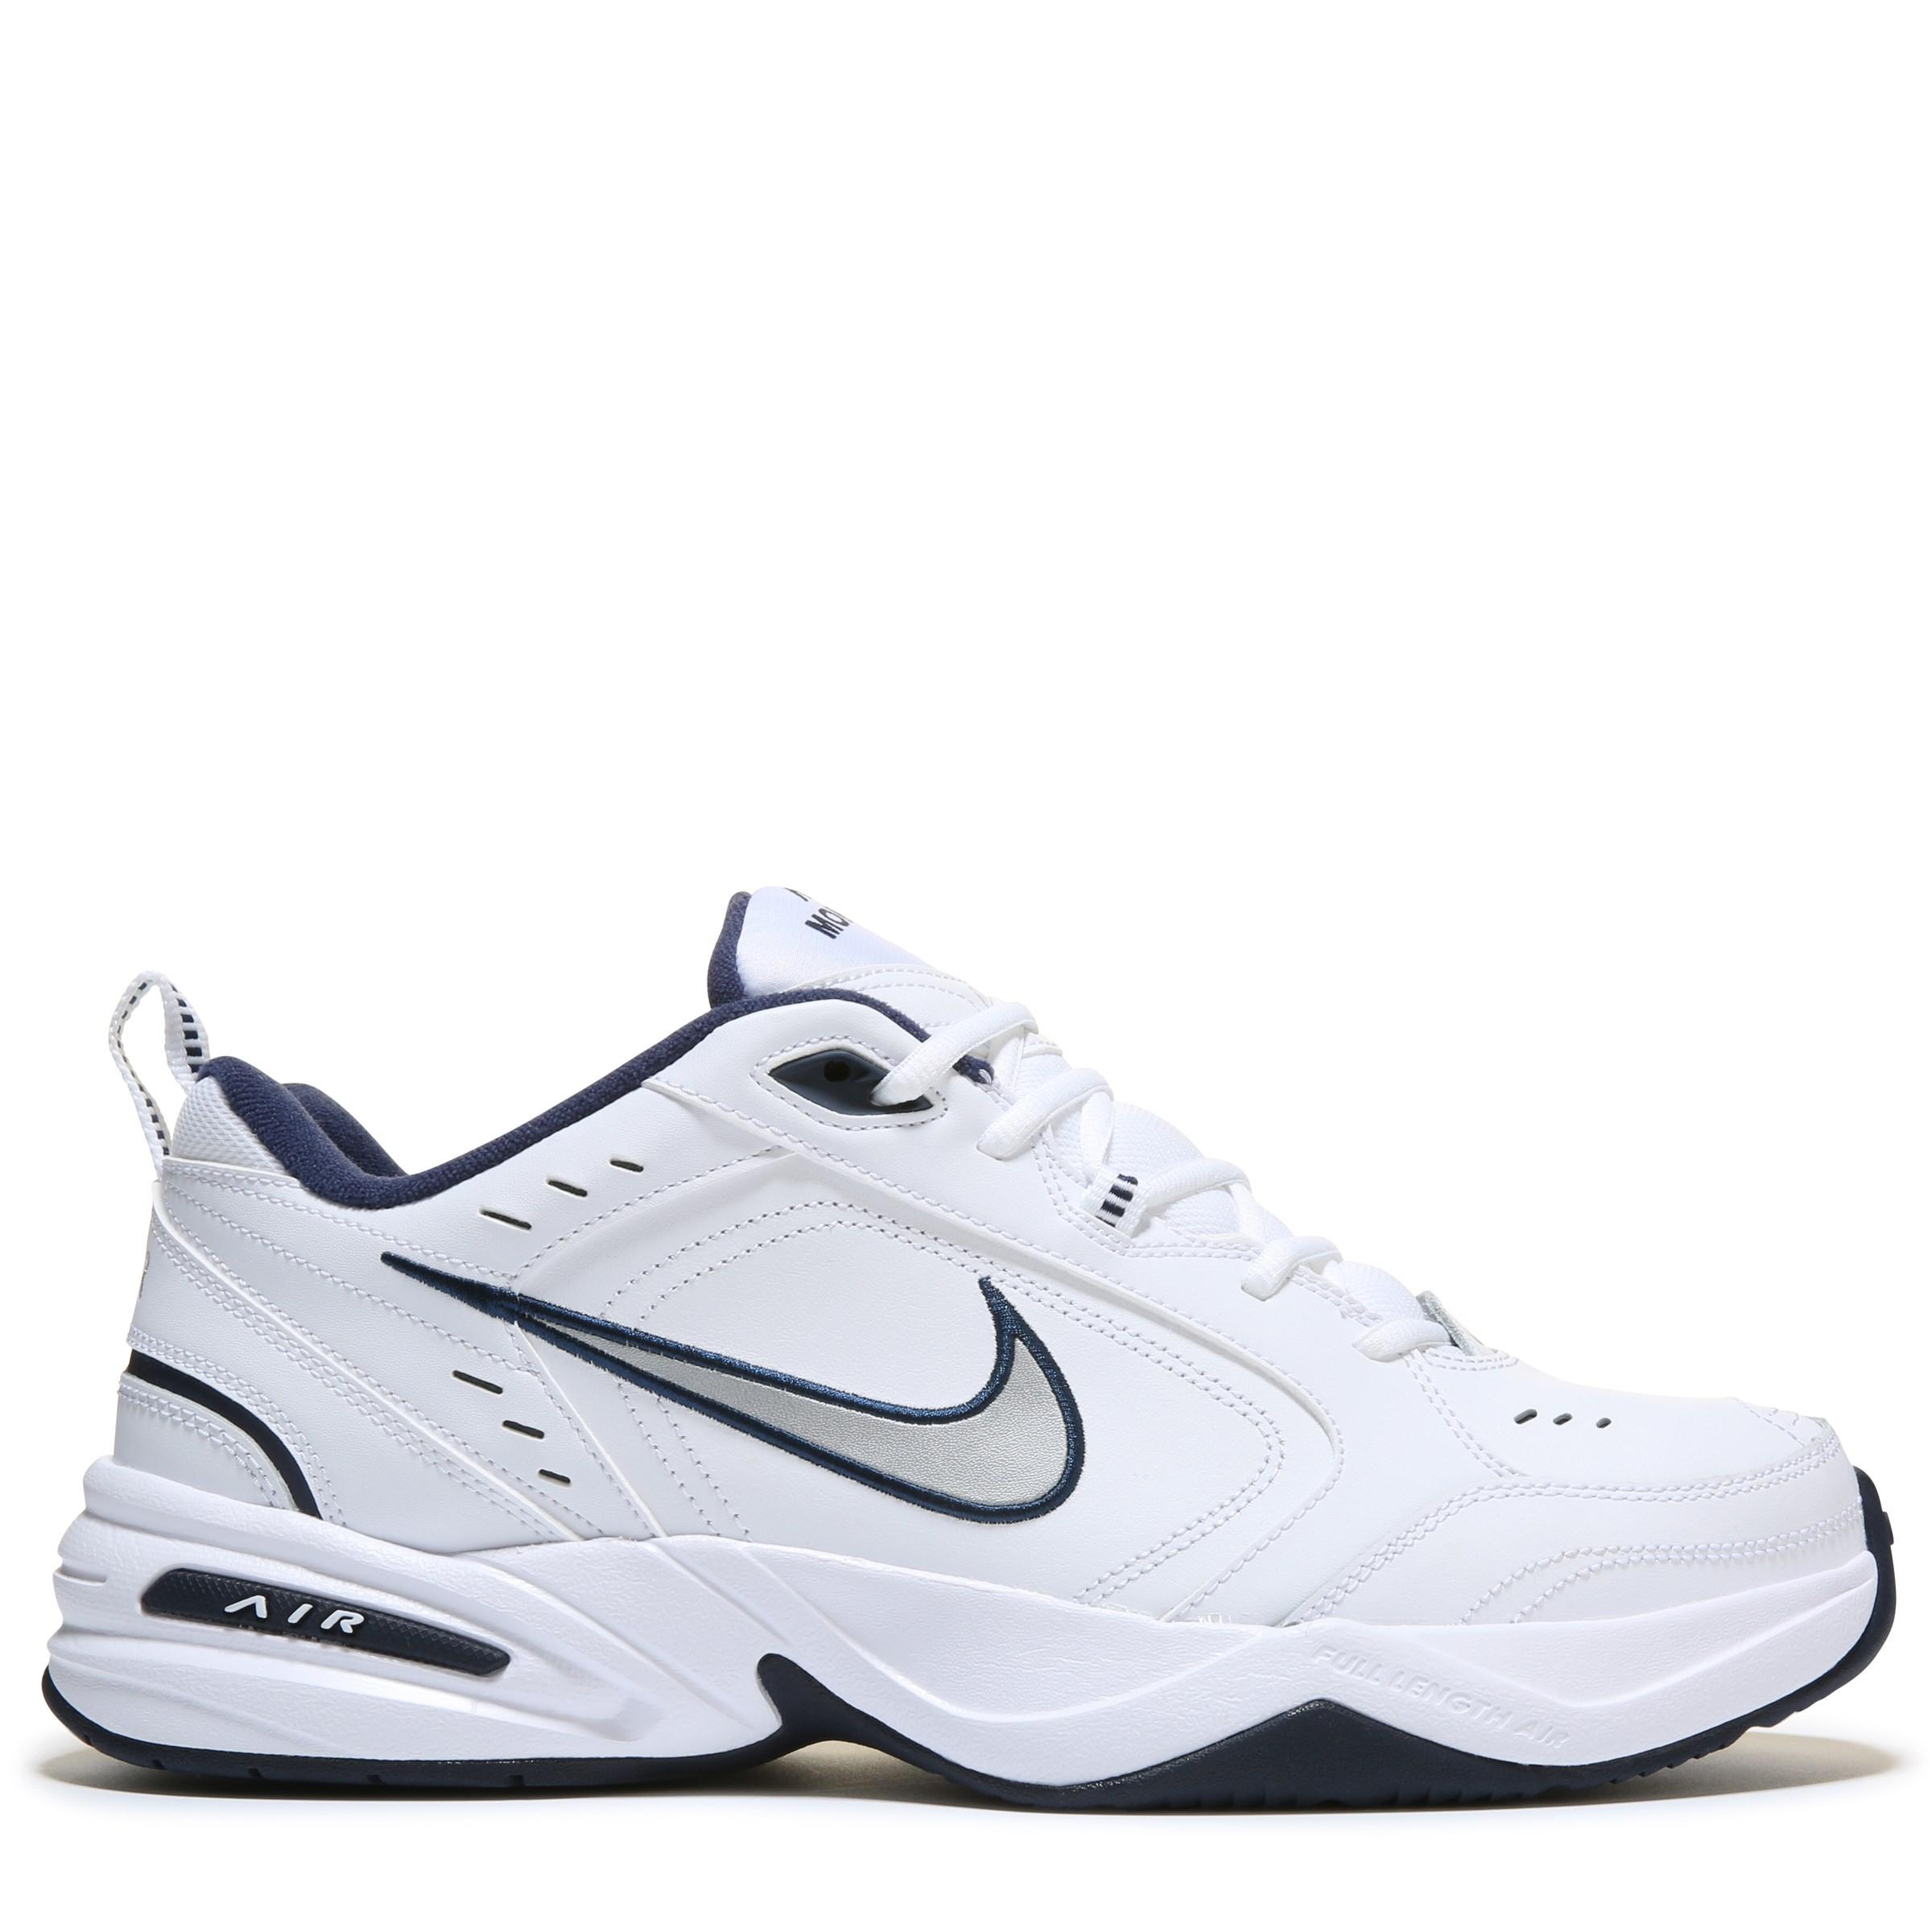 Nike Leather Air Monarch Iv Walking Shoes in White/ Silver/ Navy (White ...